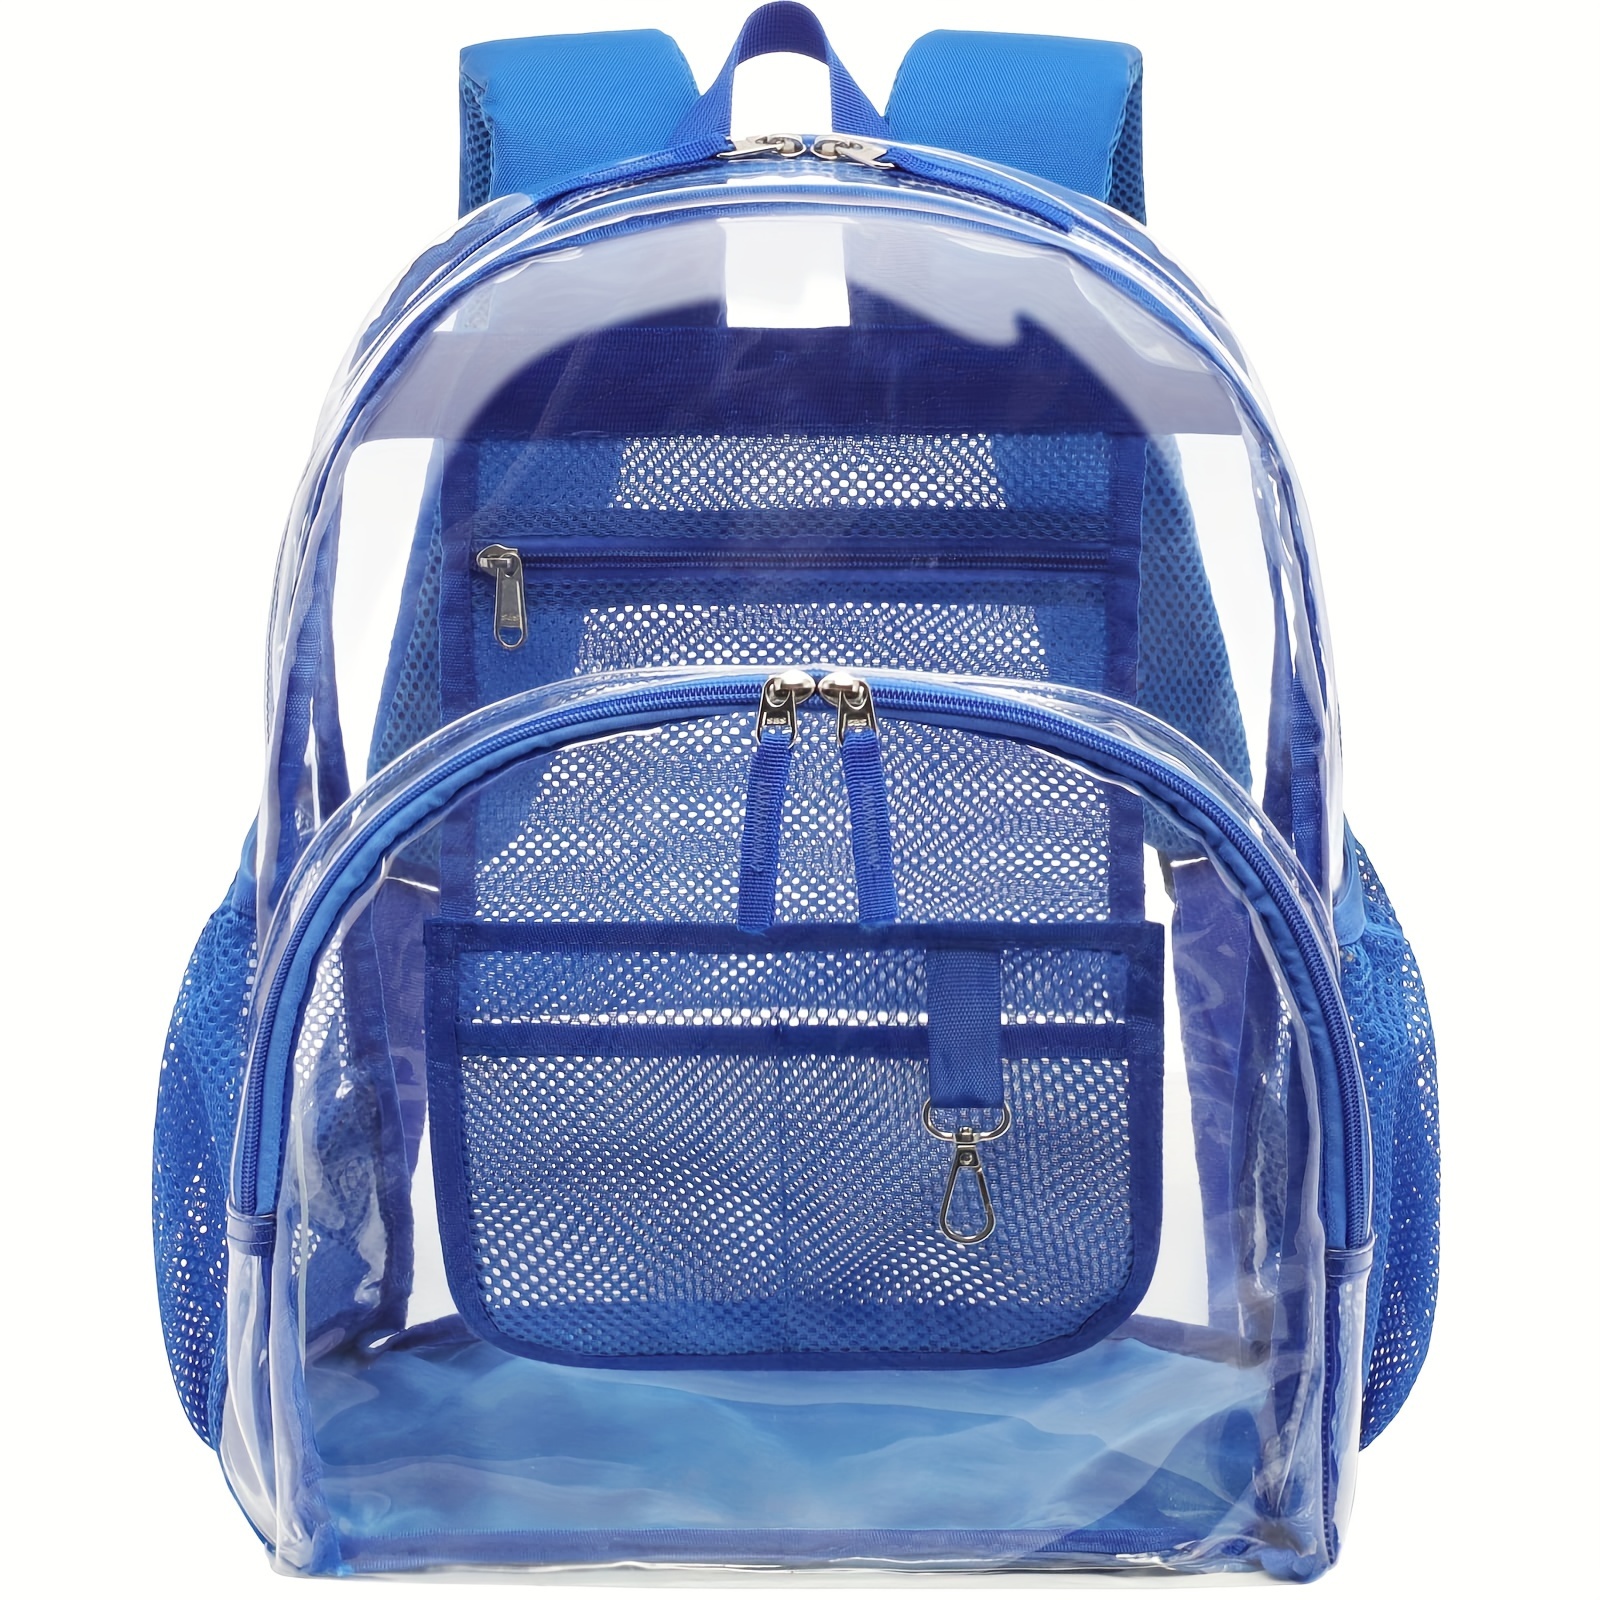 

Transparent Backpack, No Bones Clear Pvc Daypack With Single Front Zipper Pocket, Casual Style Durable School And Travel Bag